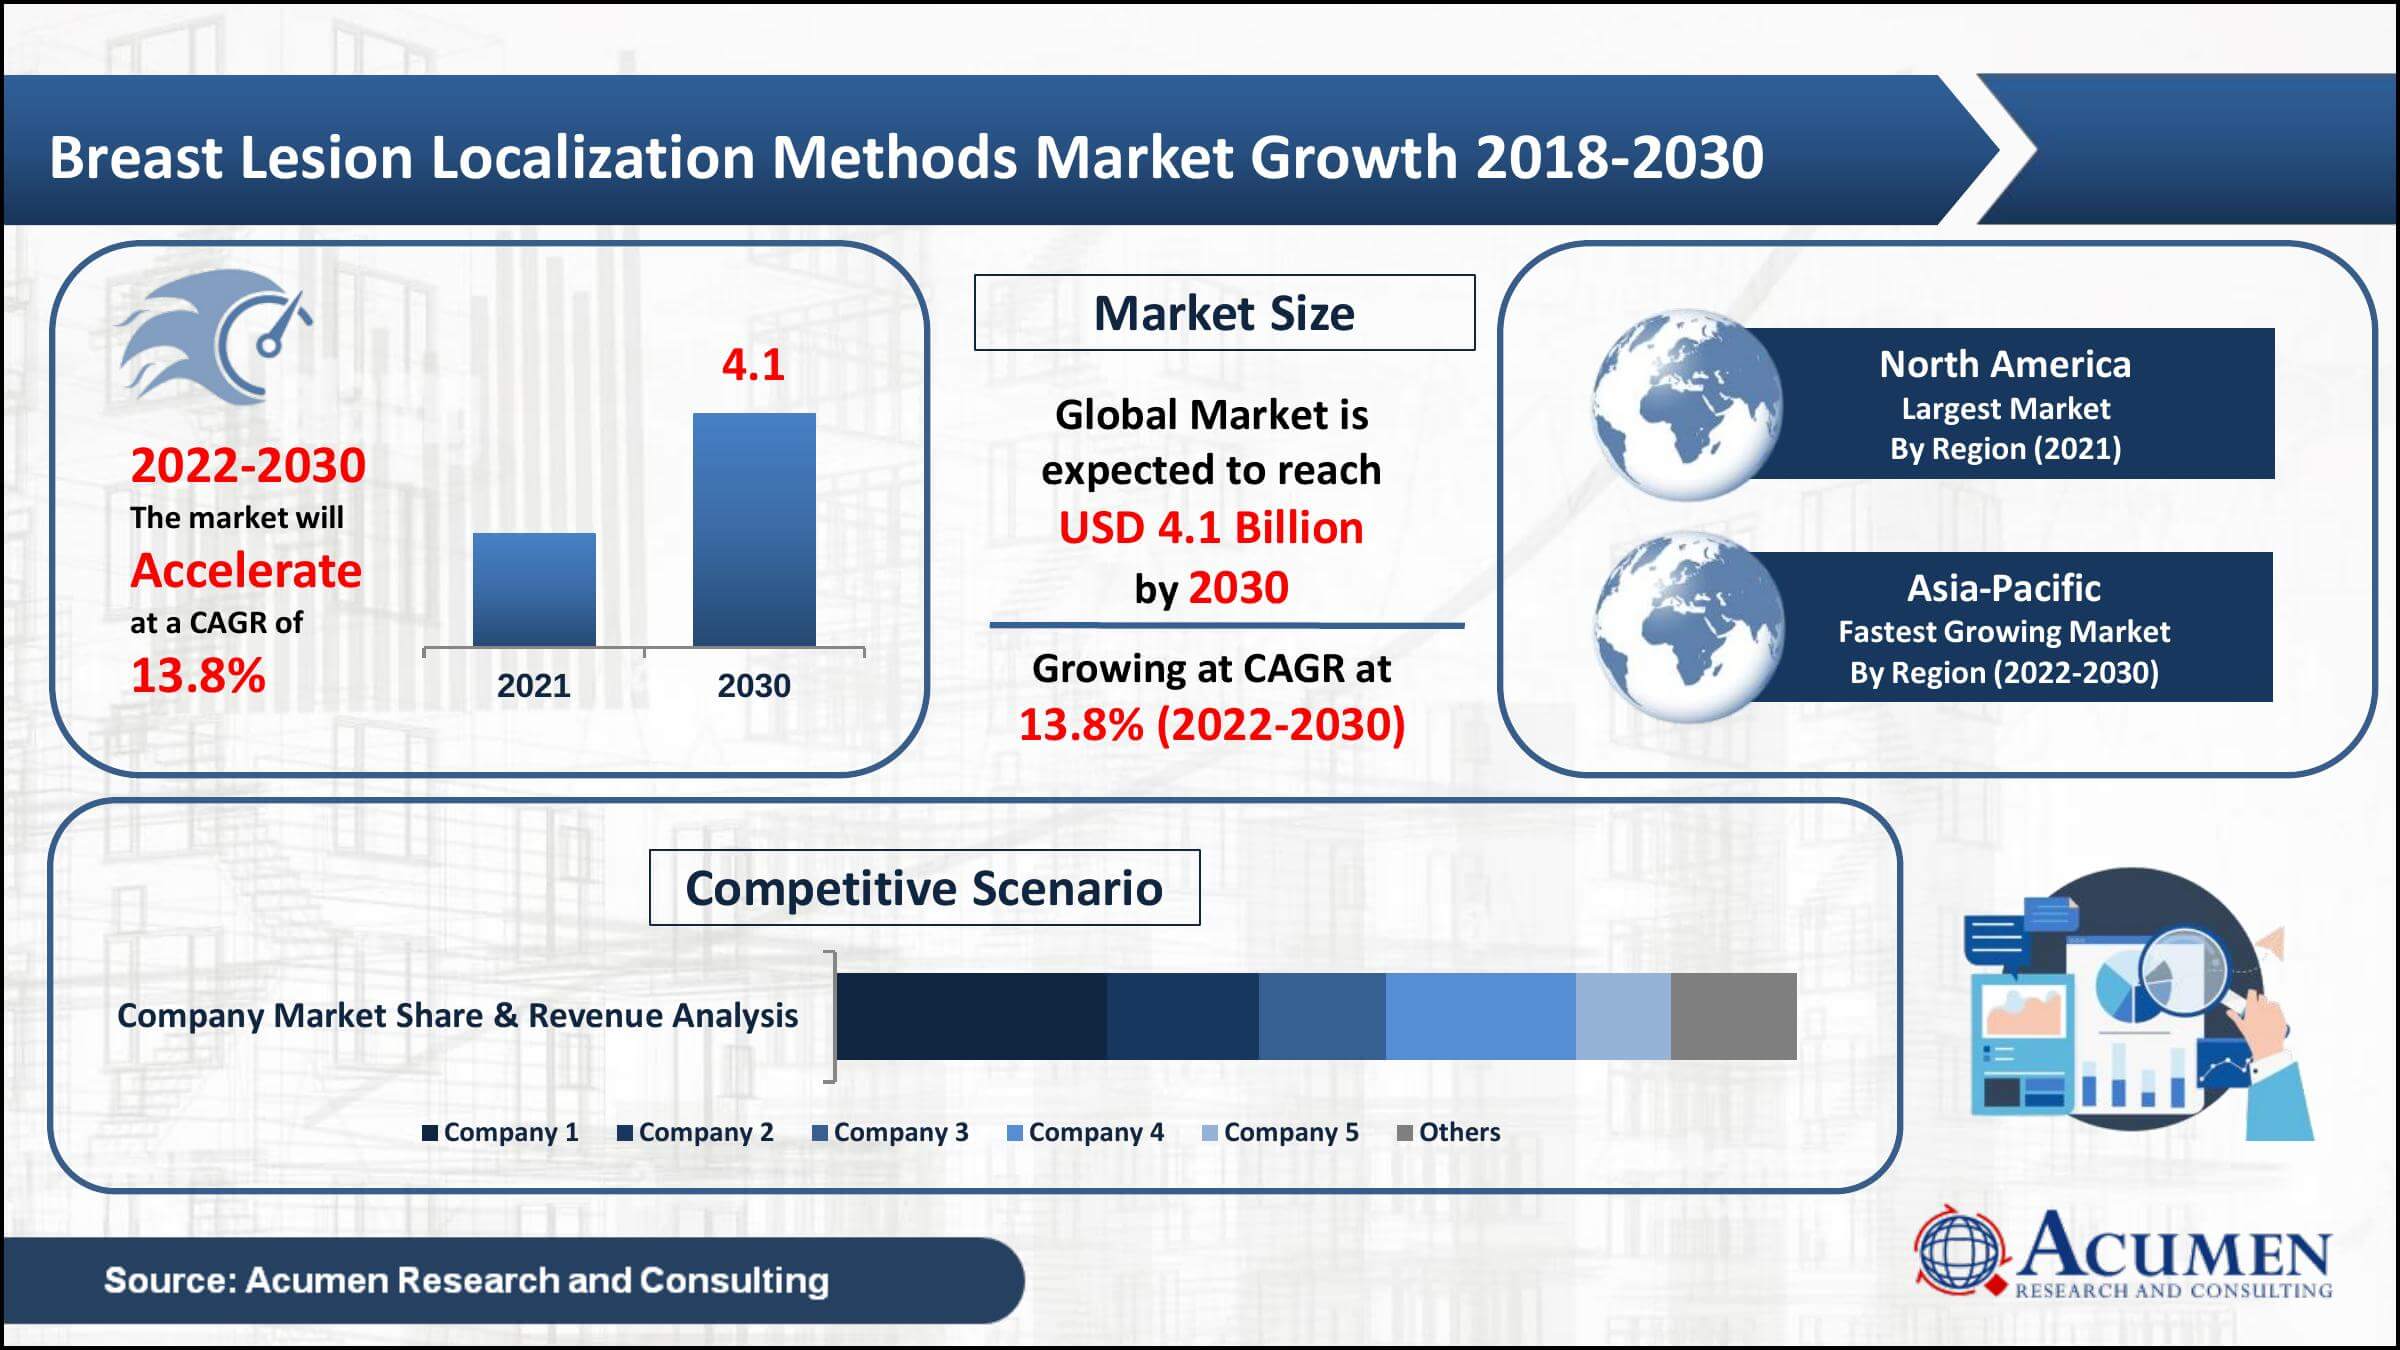 Global breast lesion localization methods market value was worth USD 1.3 Billion in 2021, with a 13.8% CAGR from 2022 to 2030